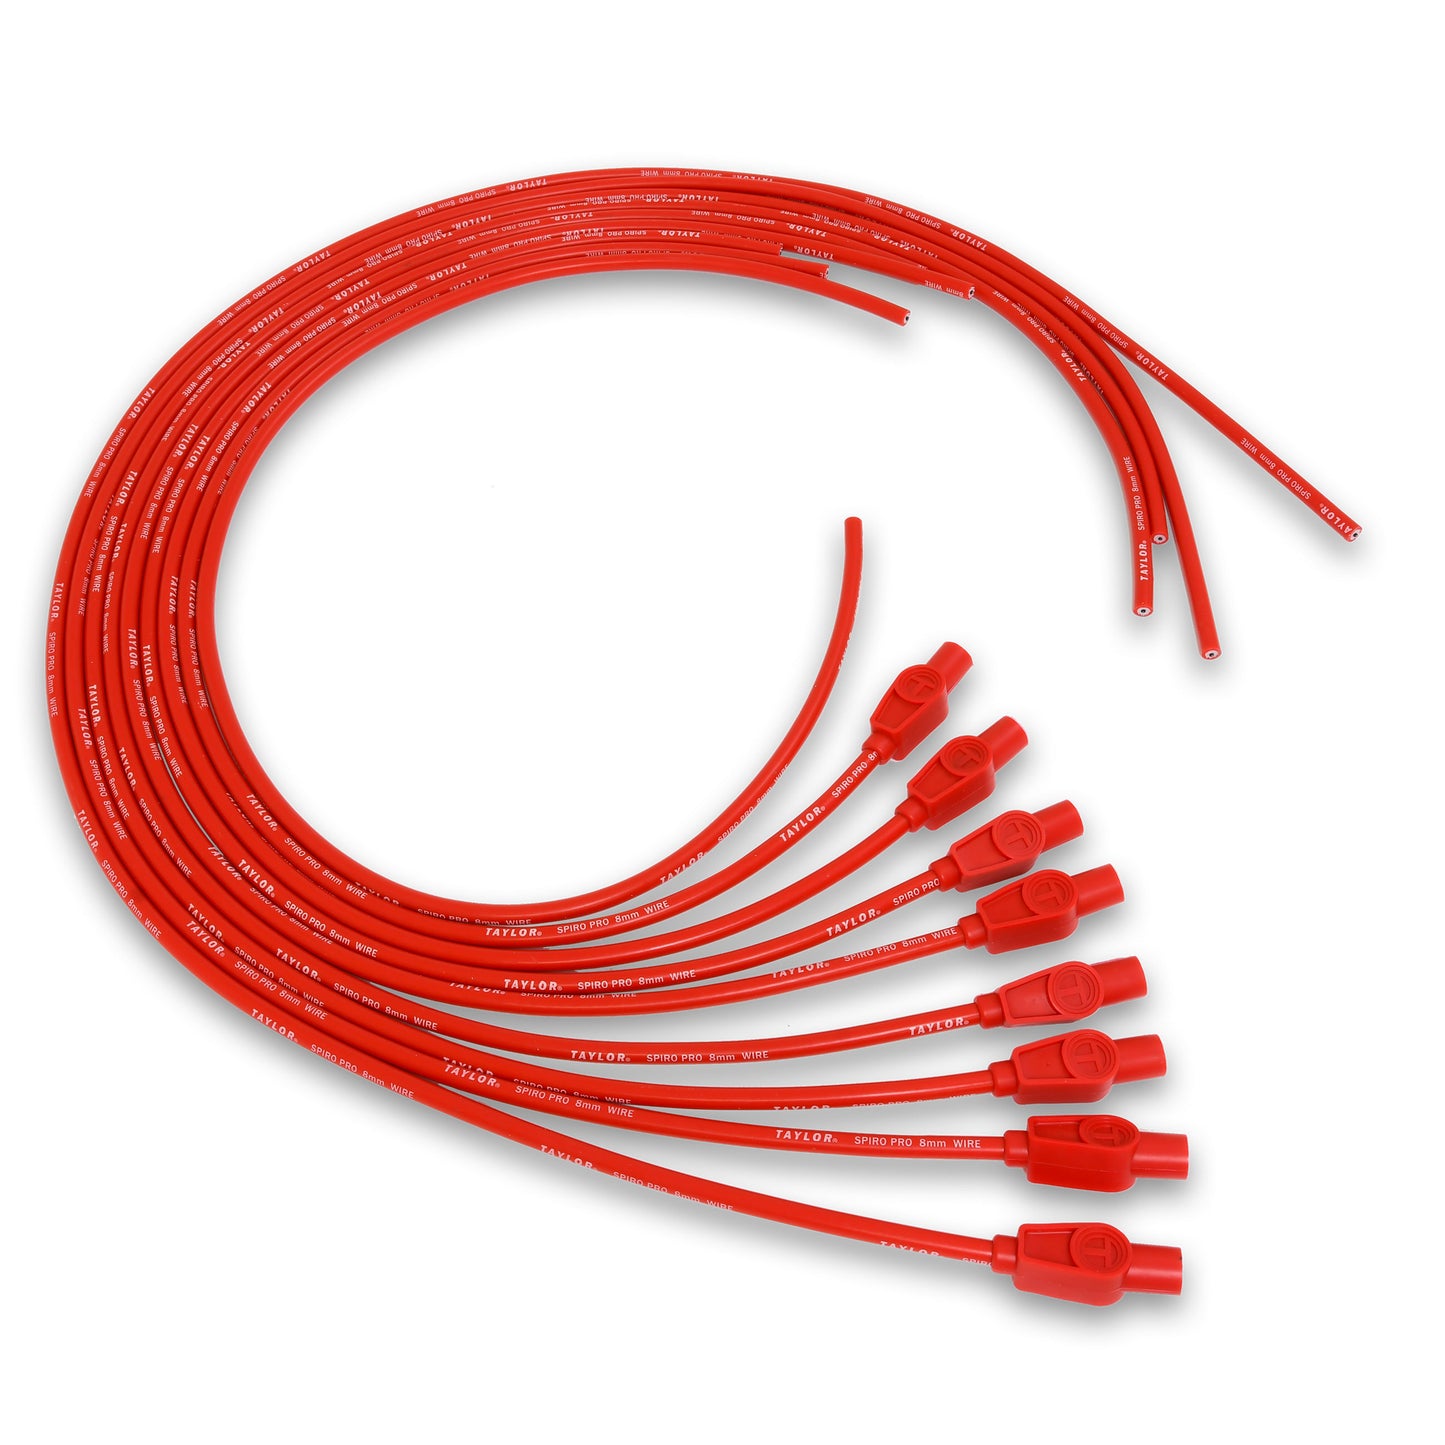 Taylor Cable 73255 8mm Spiro-Pro Ignition Wires univ 8 cyl 180 red